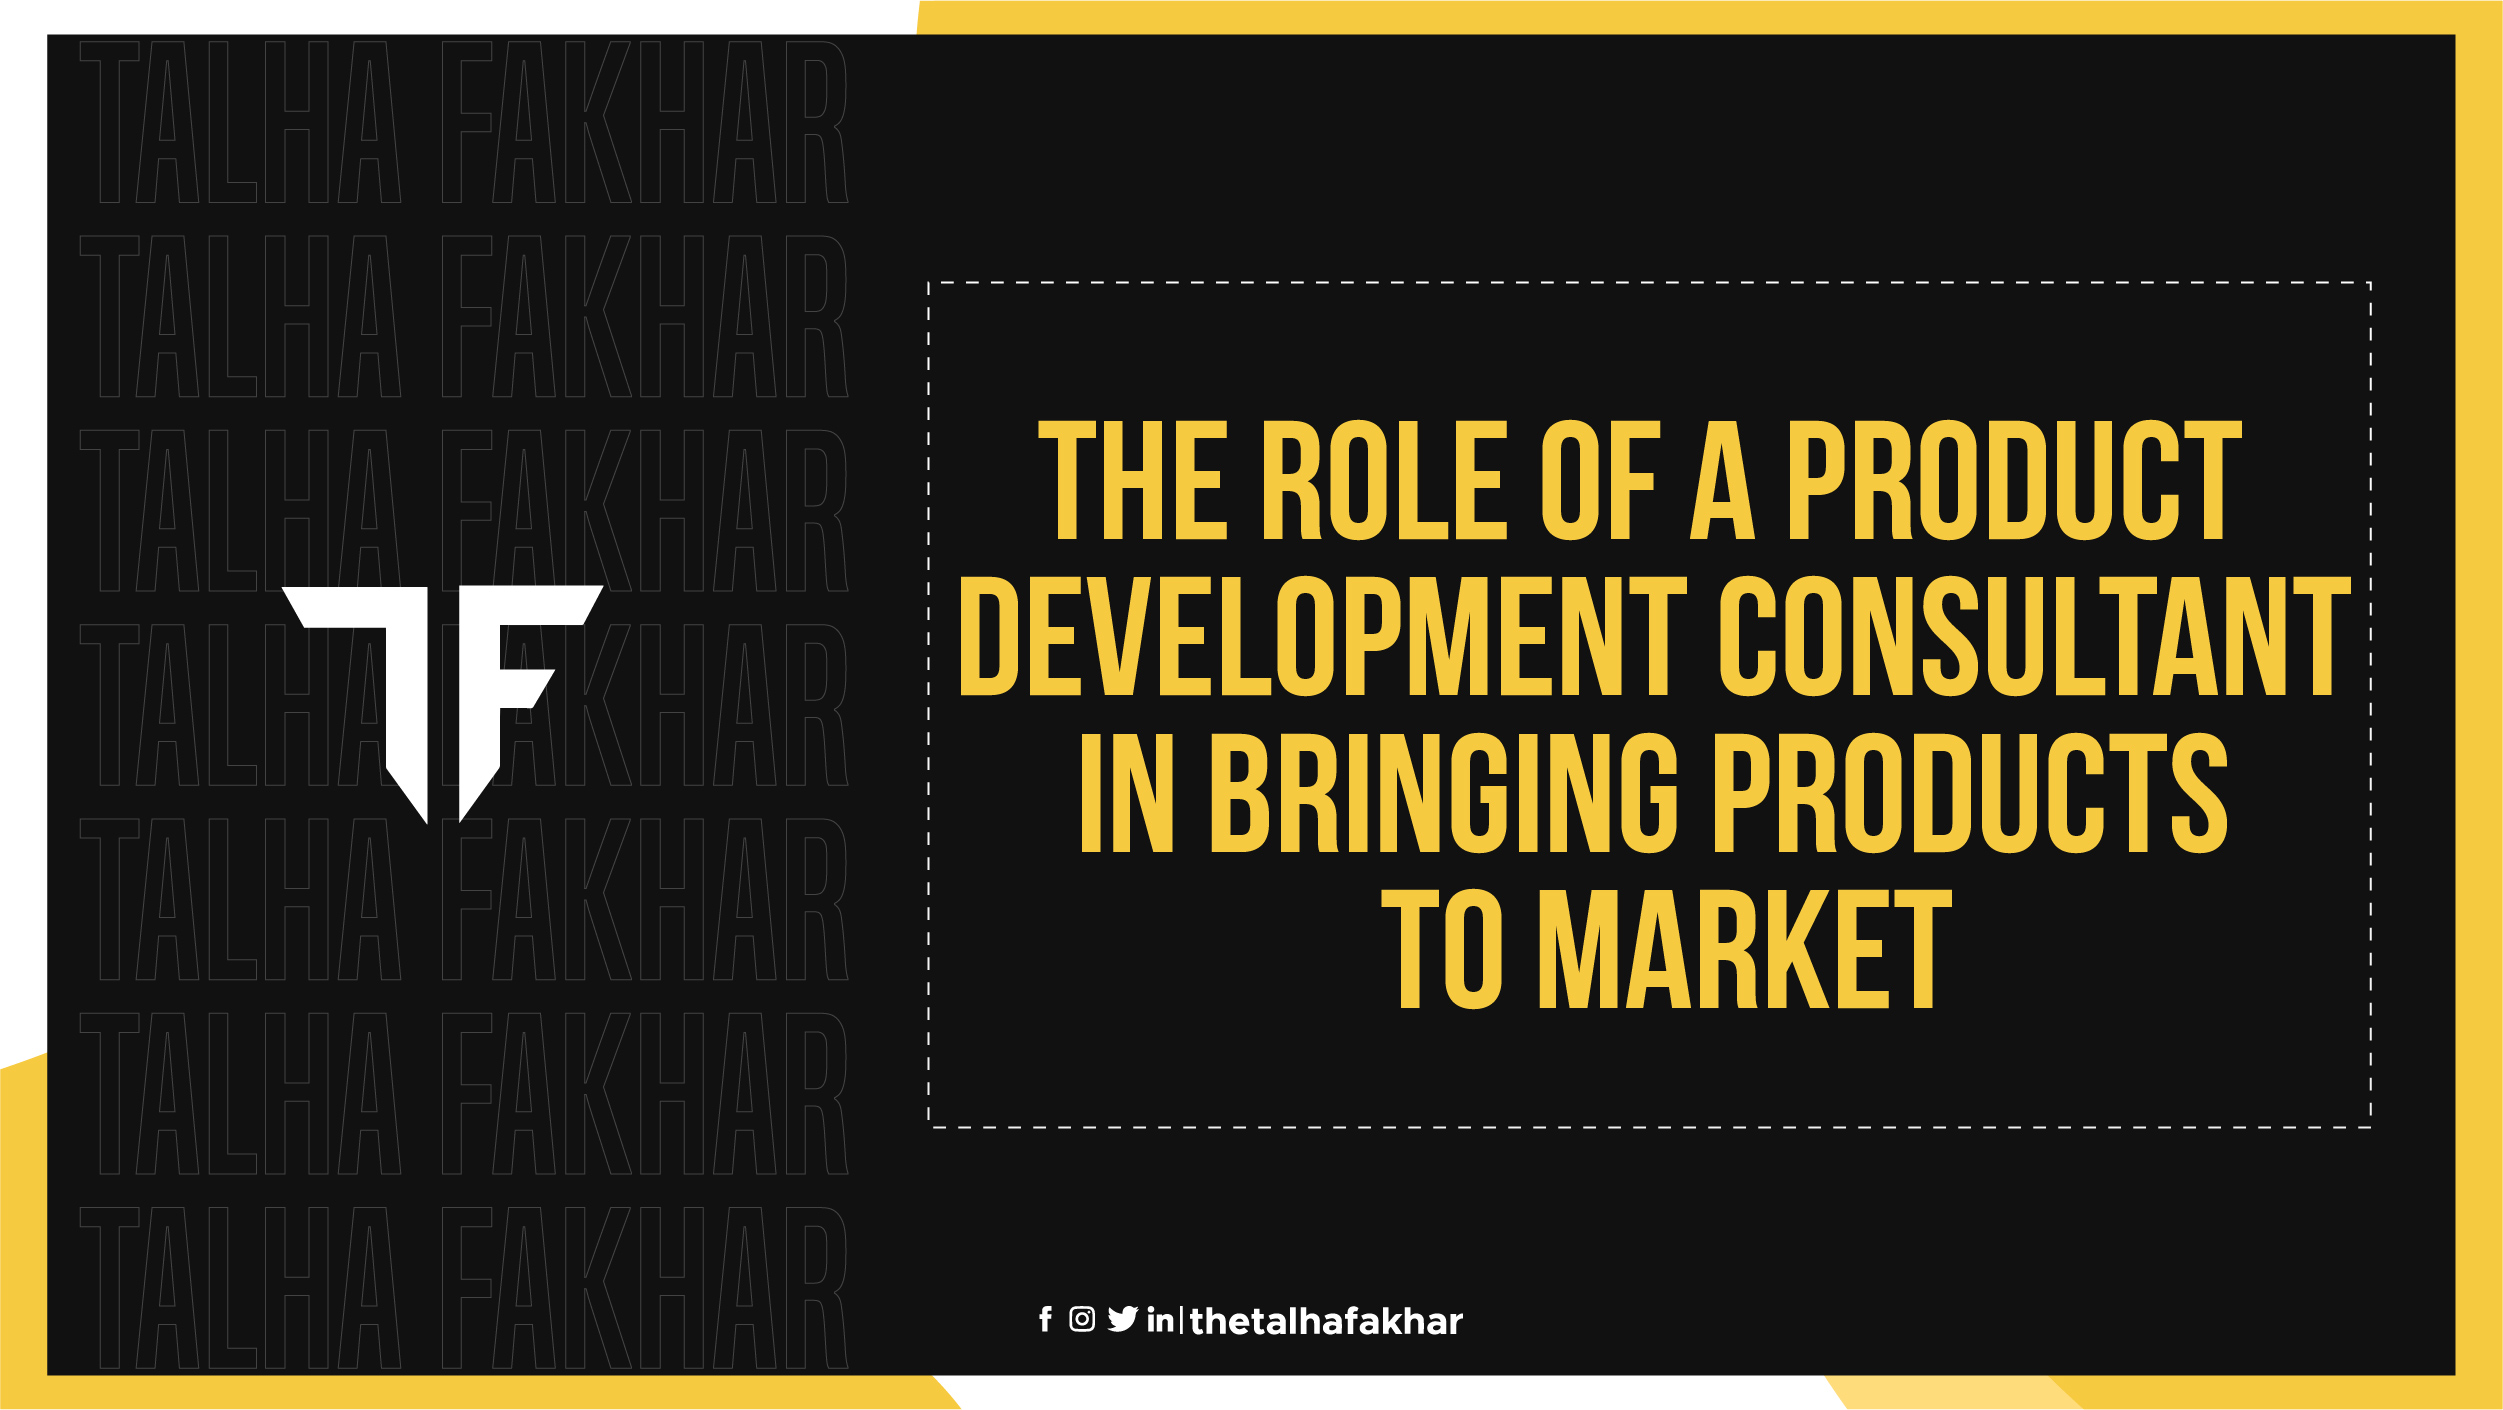 The Role Of A Product Development Consultant In Bringing Products To Market